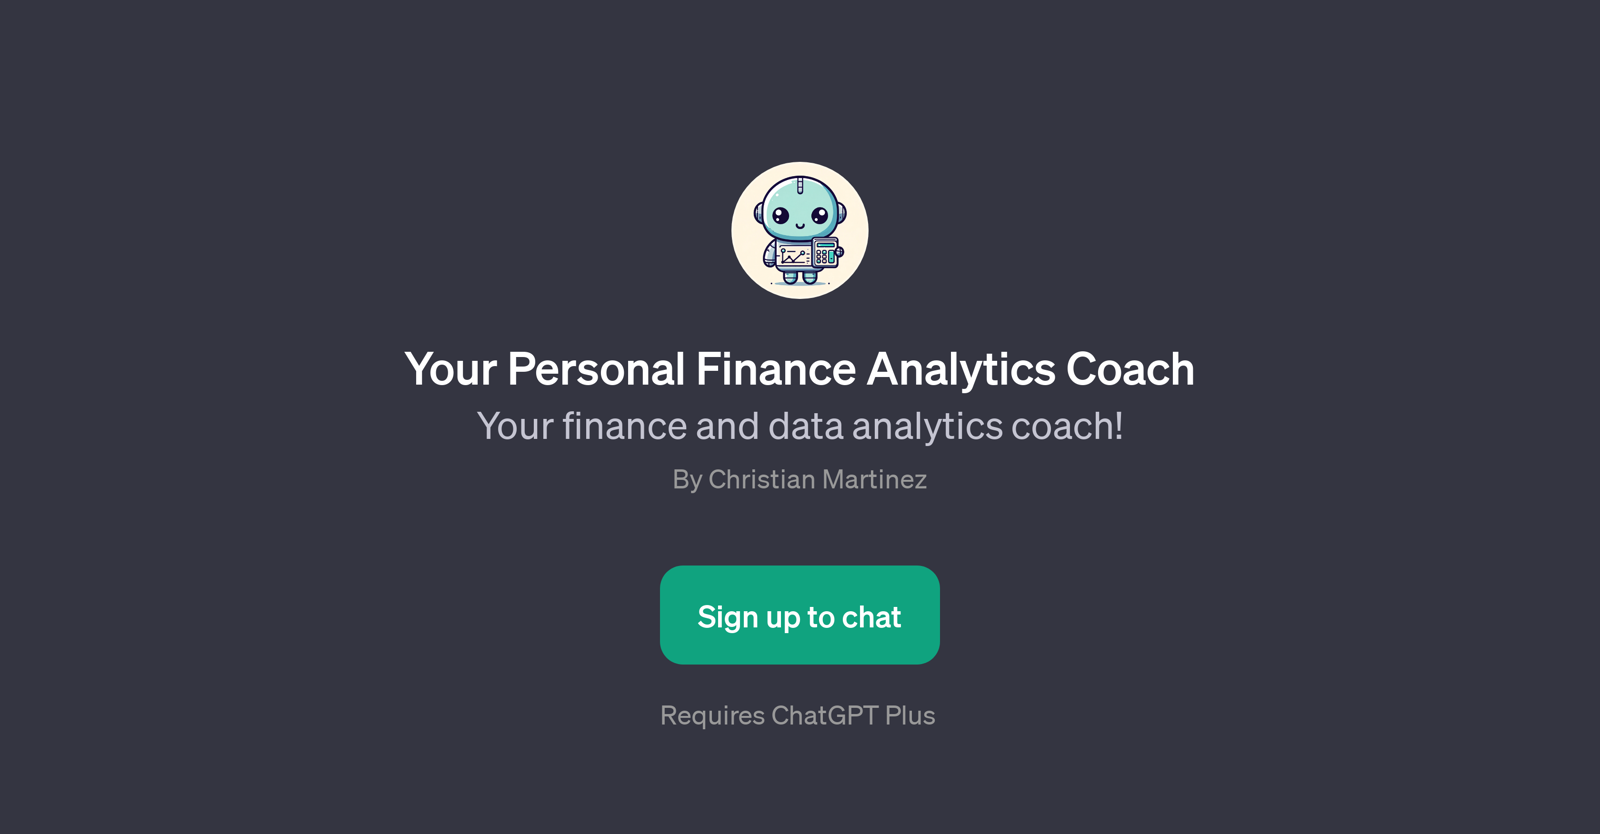 Your Personal Finance Analytics Coach website